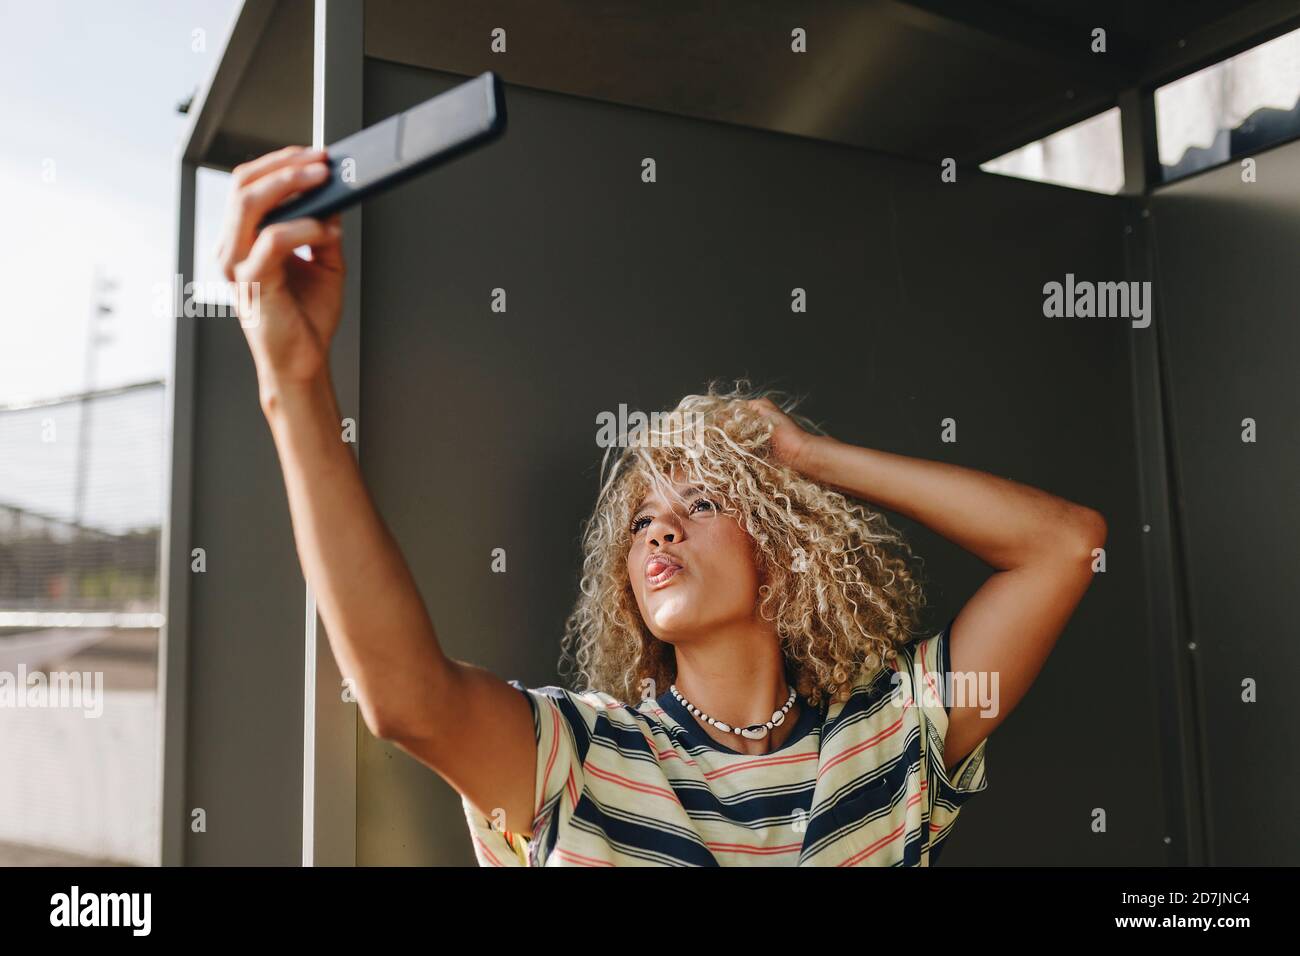 Woman Sticking Out Tongue While Taking Selfie Through Smart Phone Against Metallic Wall Stock 